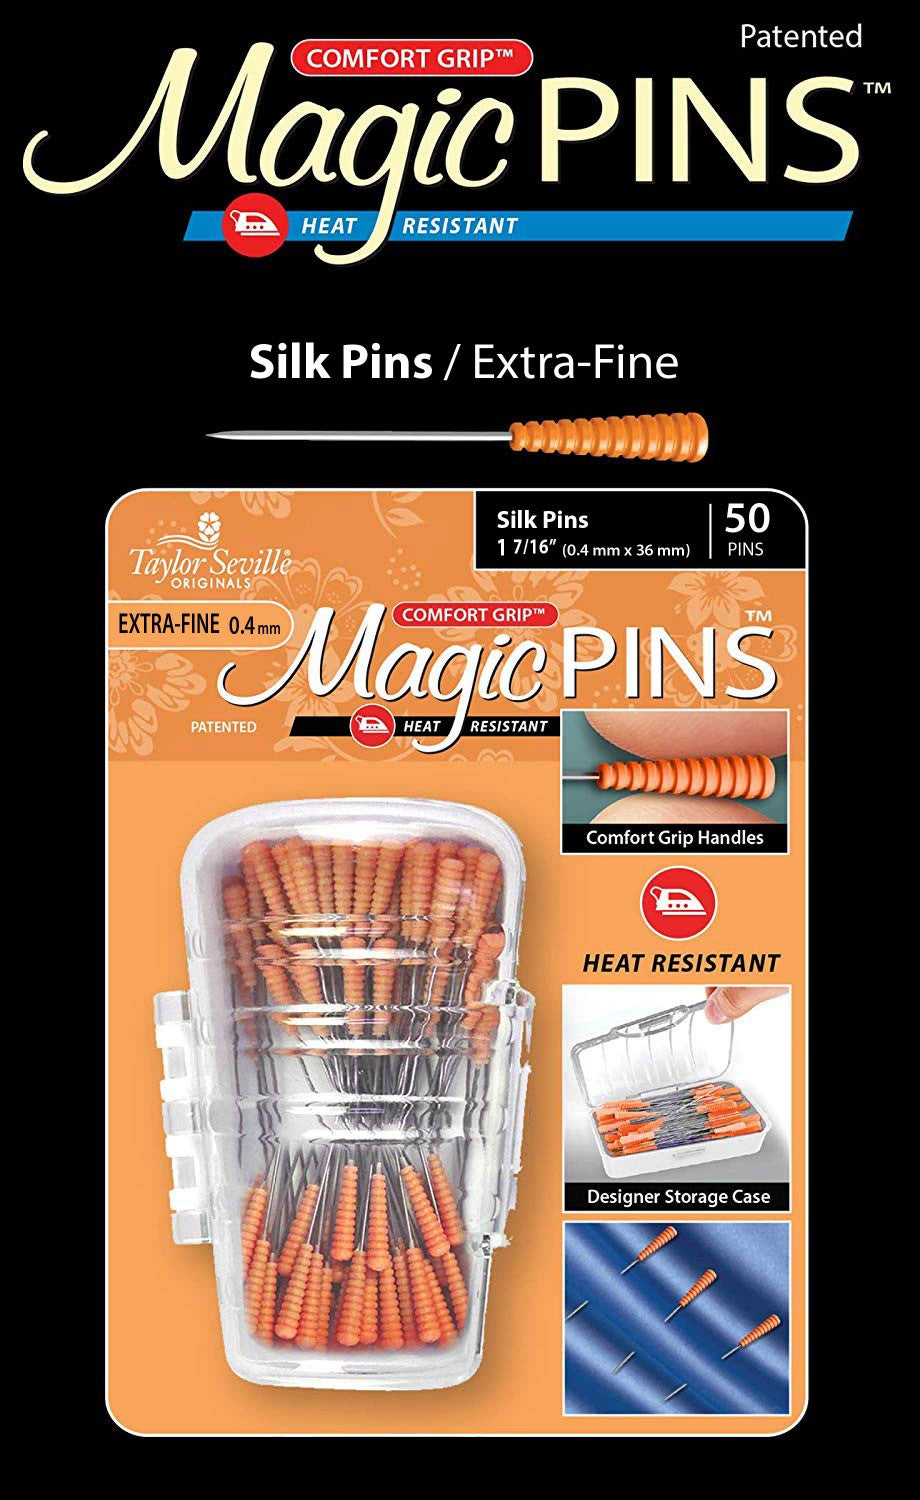 Magic Pins by Taylor Seville - Silk Extra Fine (0.4mm x 36mm)